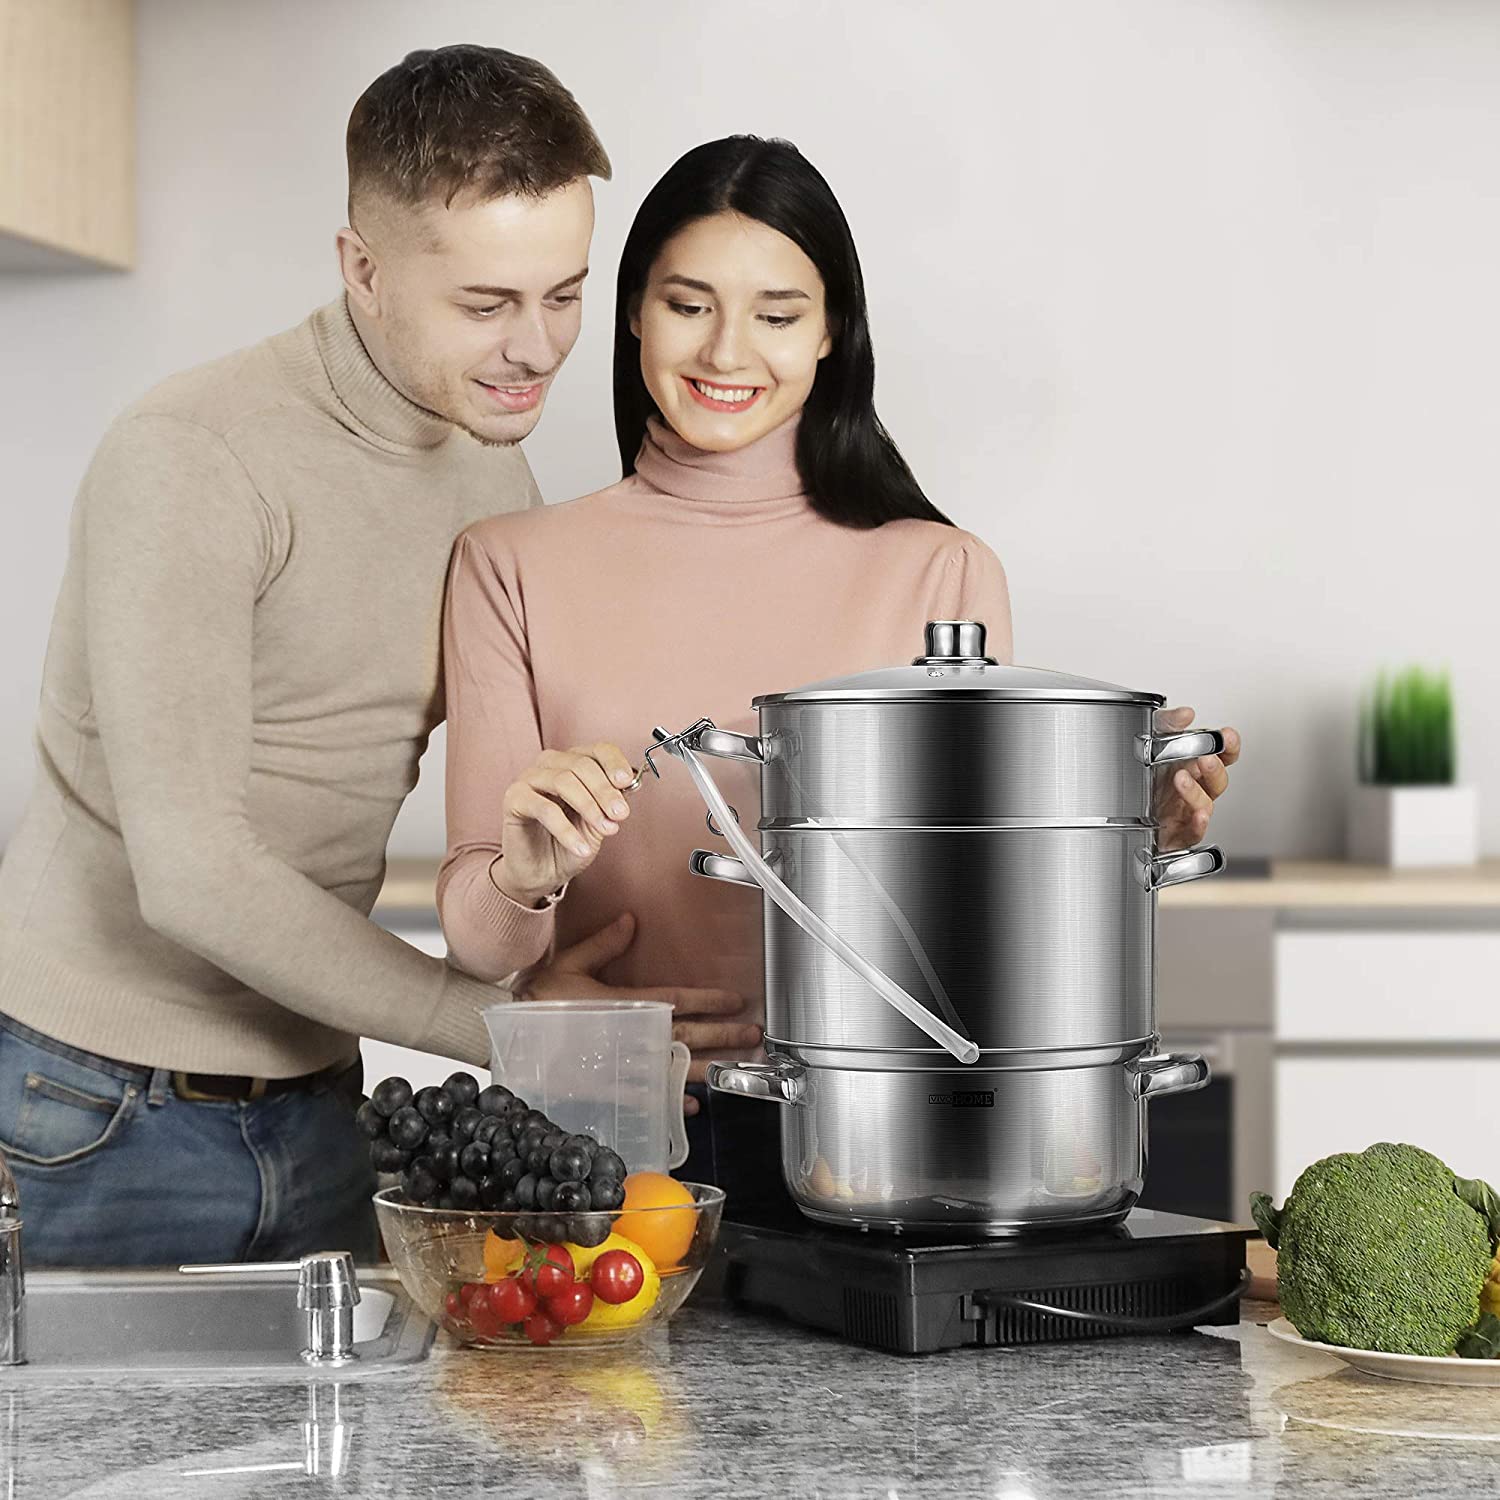 Euro Cuisine Stainless Steel Stove Top Steam Juicer